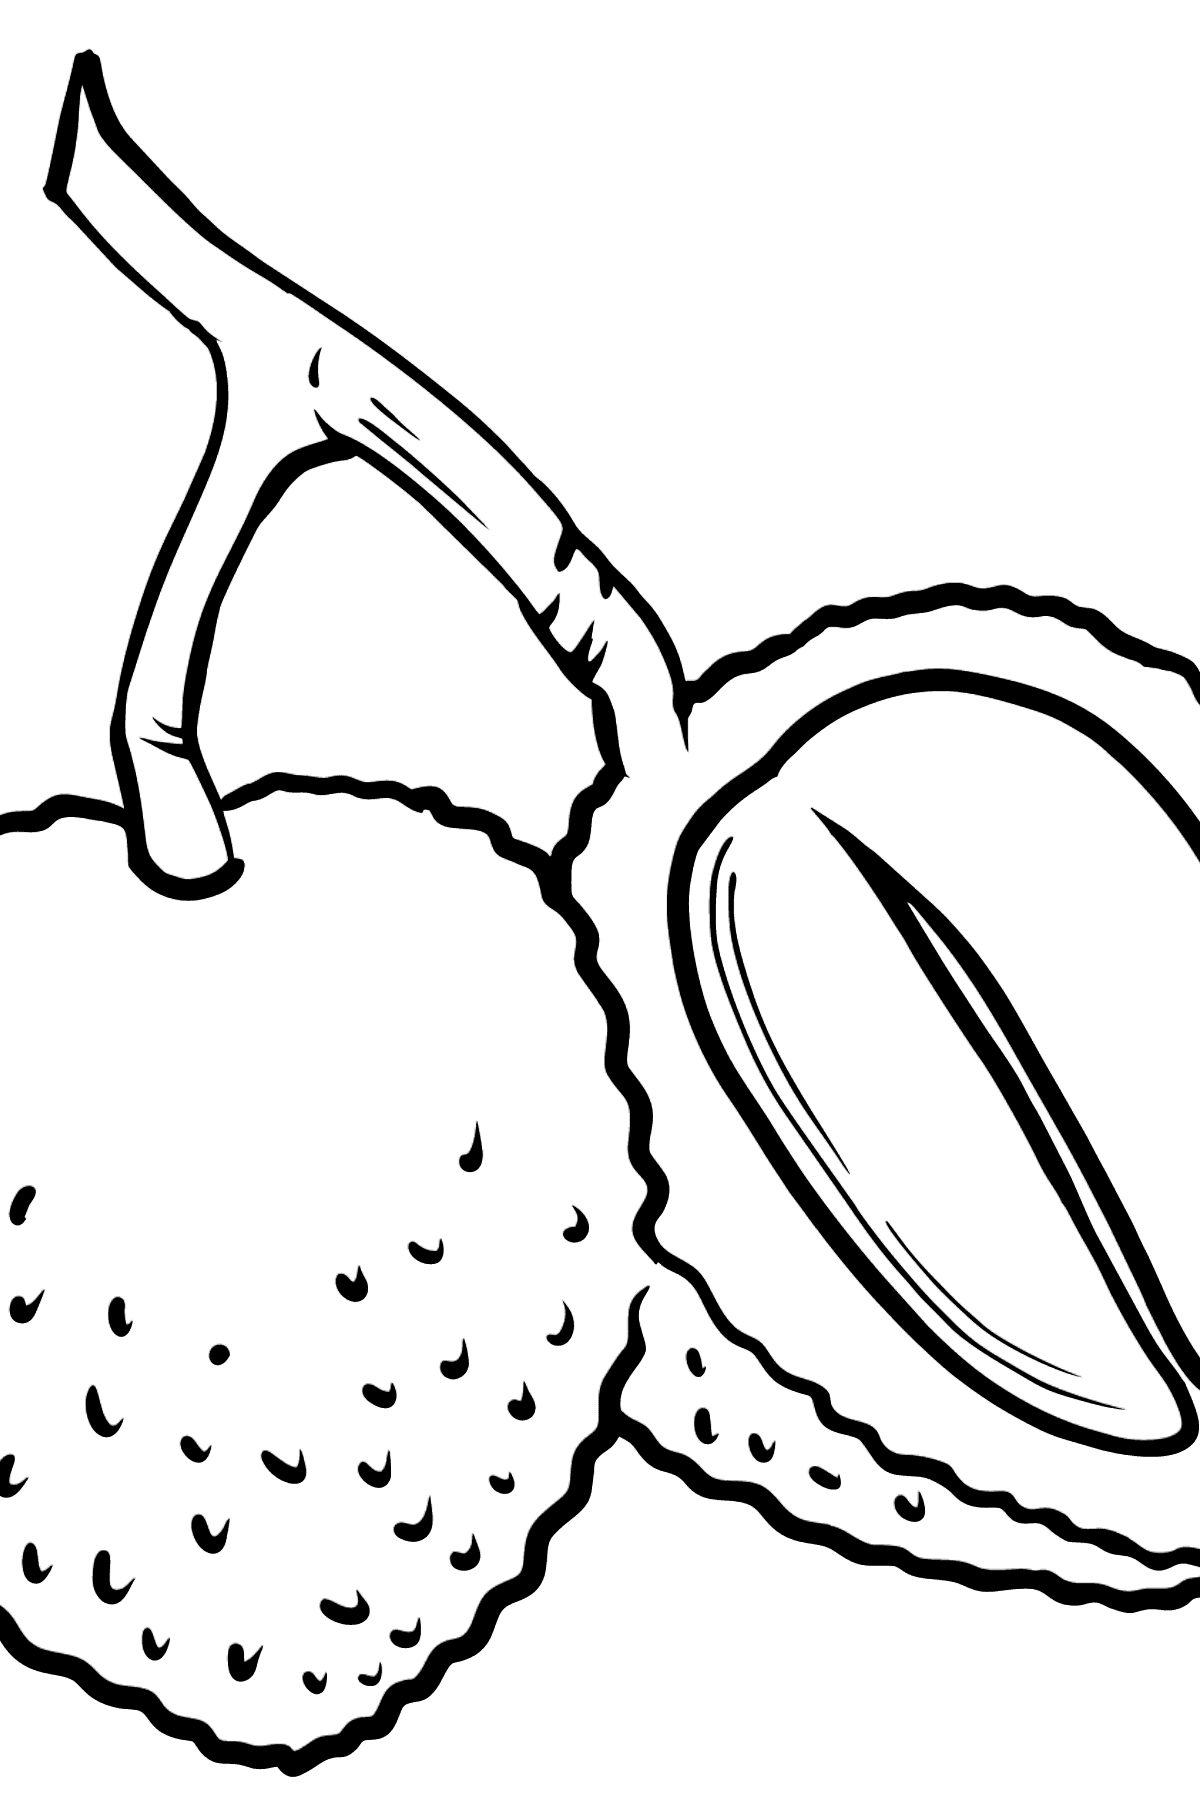 Durian coloring page - Coloring Pages for Kids